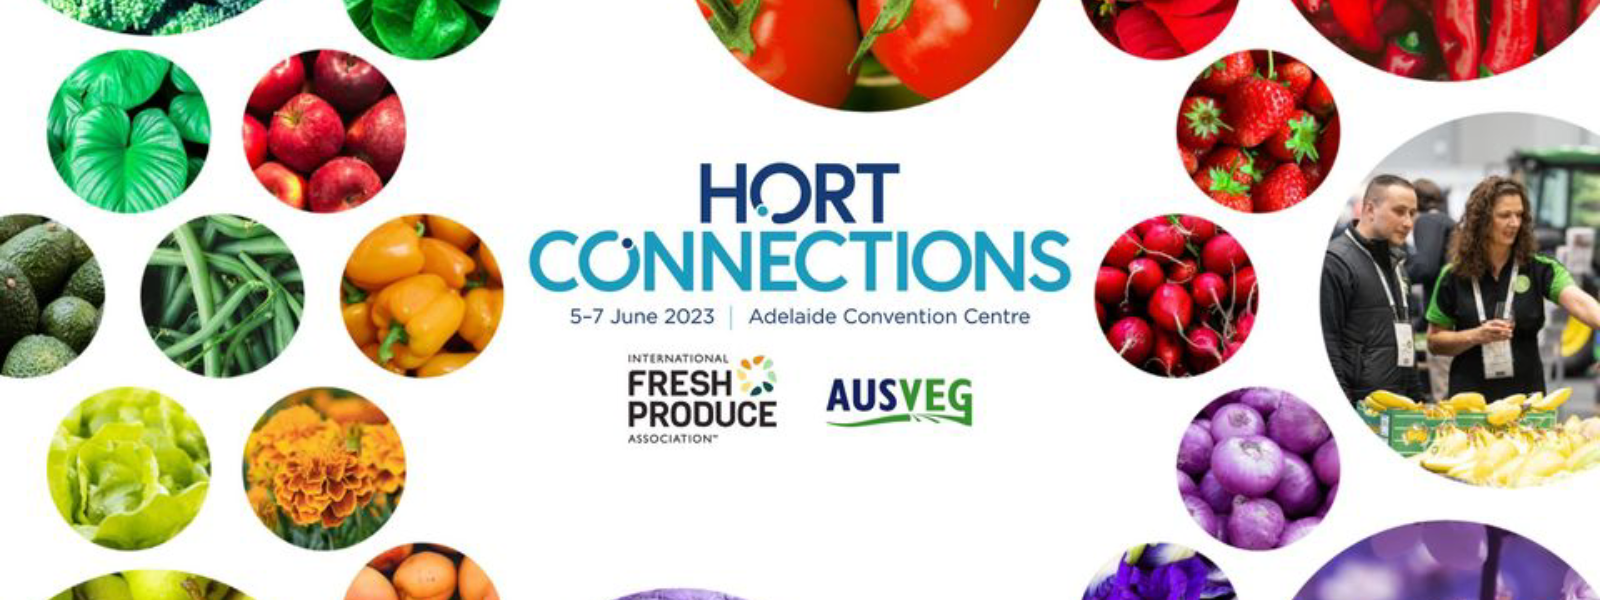 hort connections